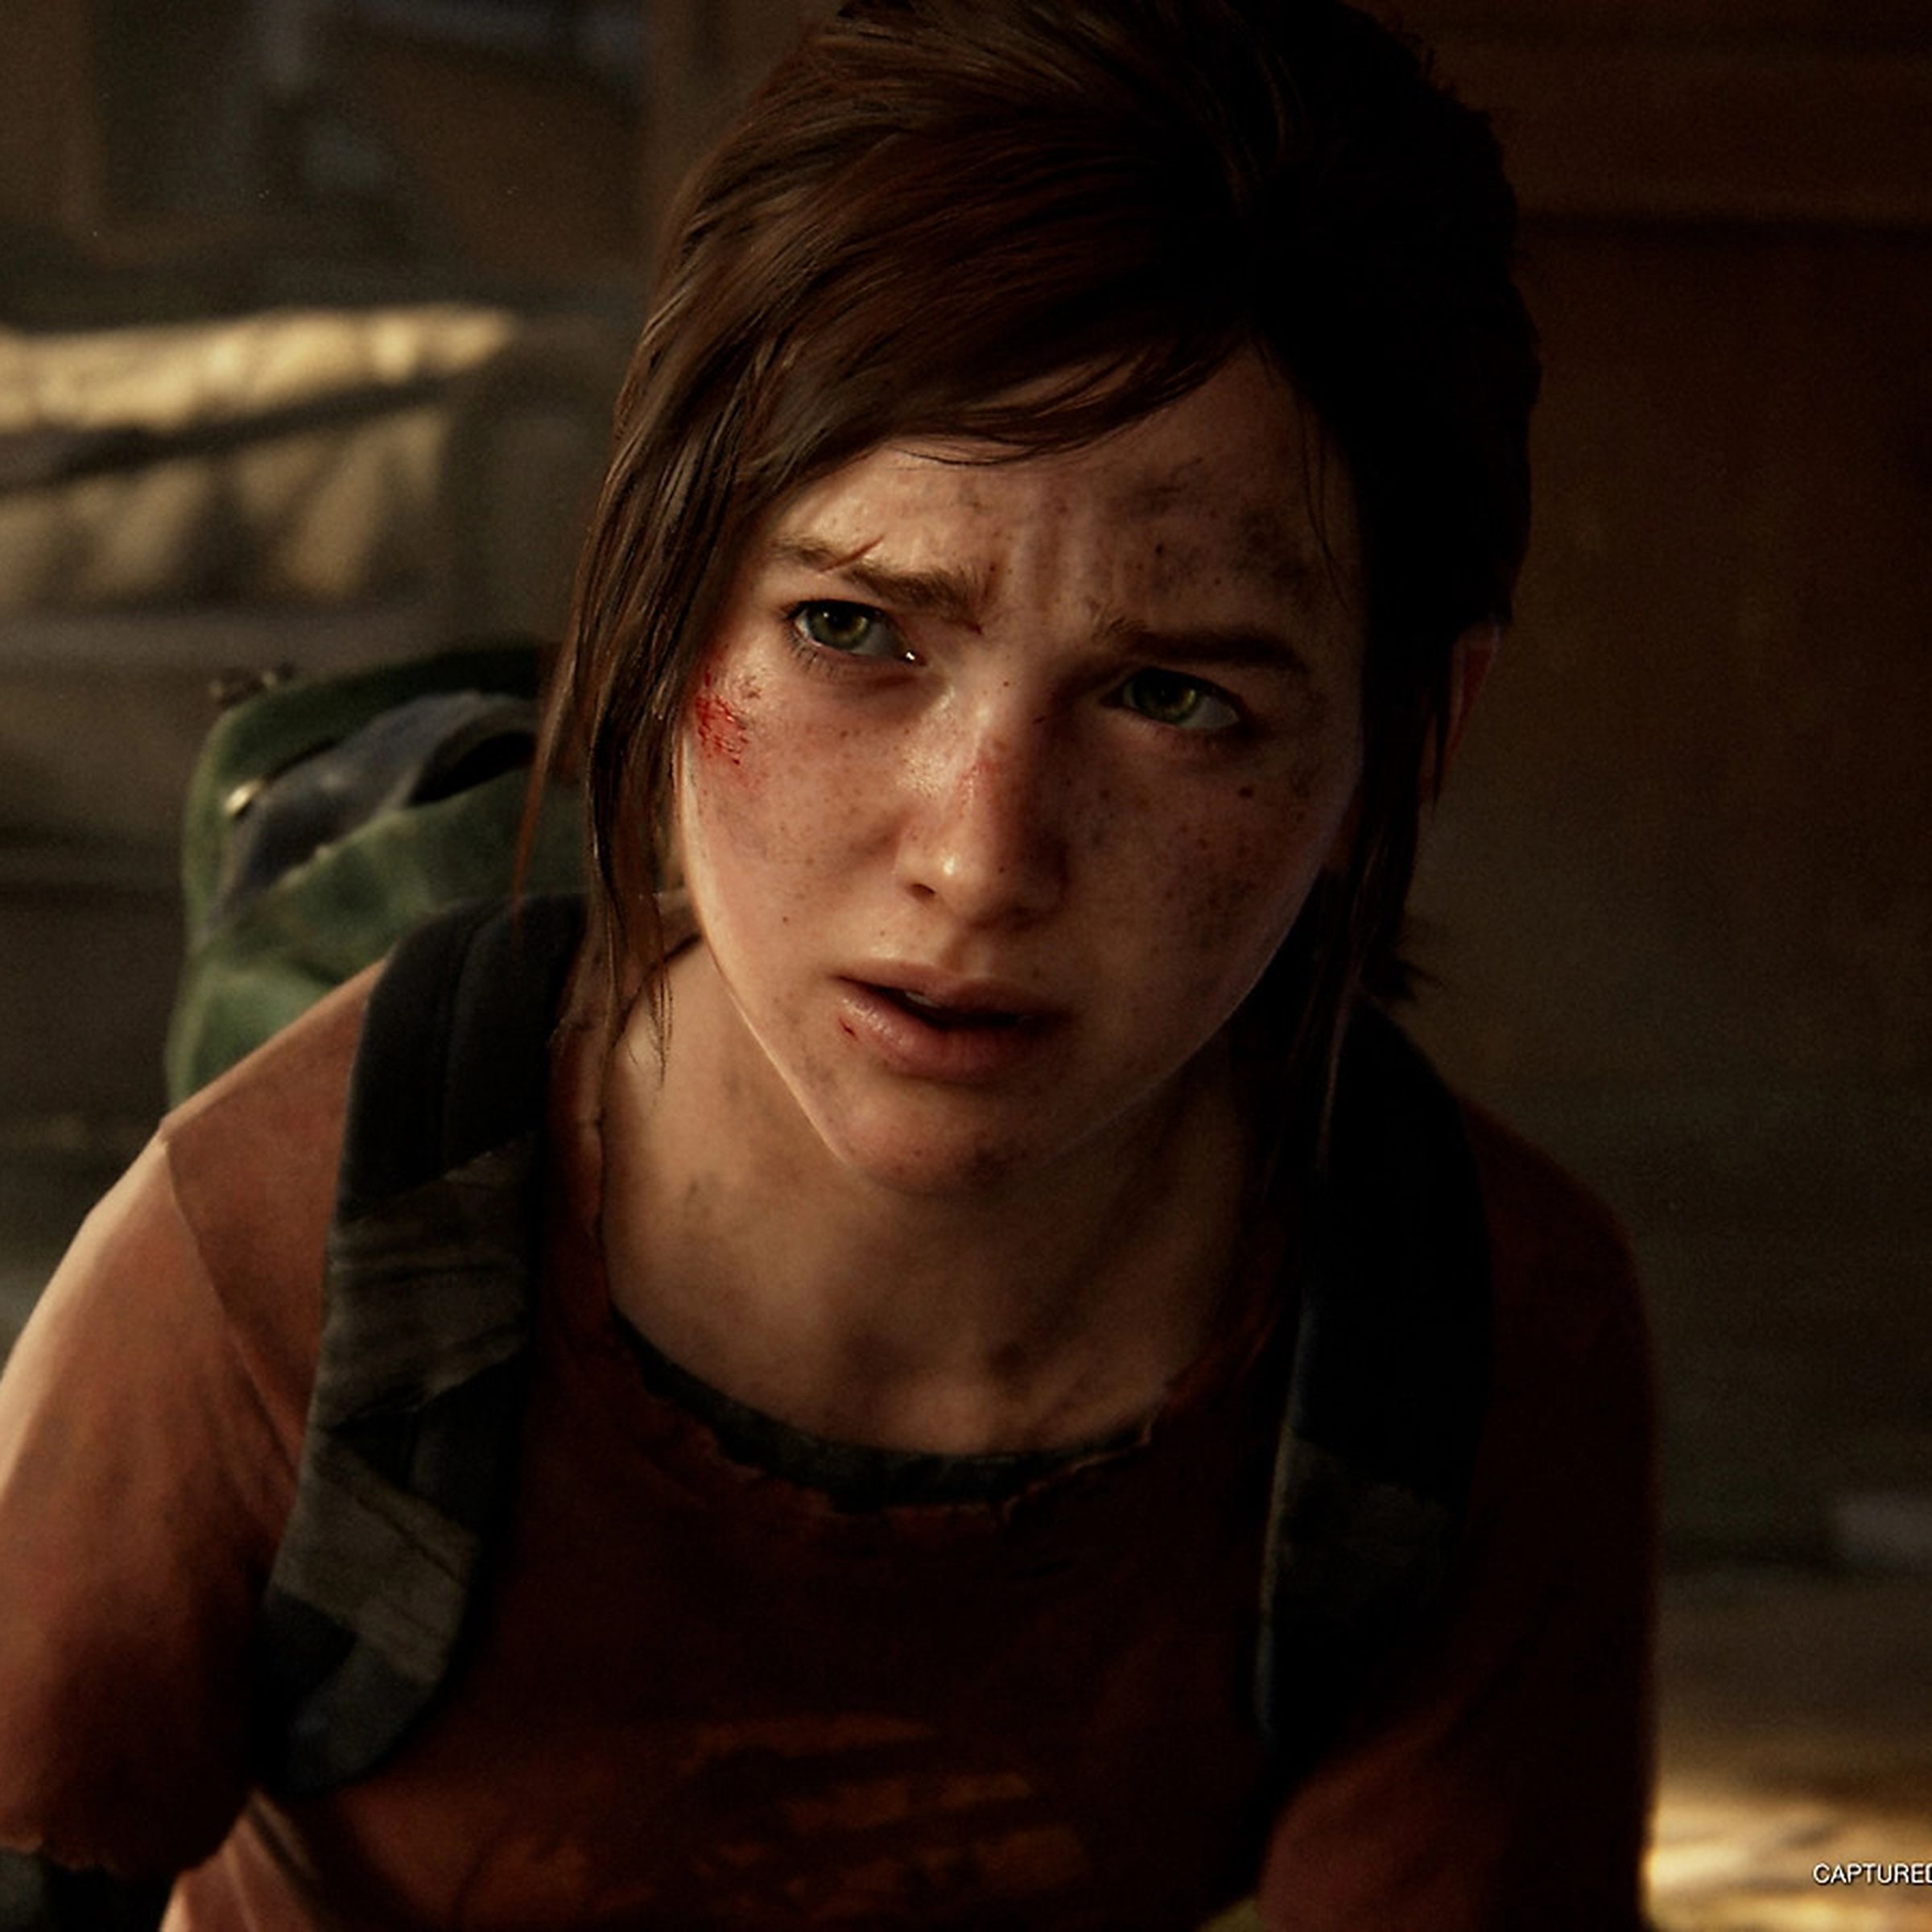 A screenshot showing Ellie in The Last of Us Part I